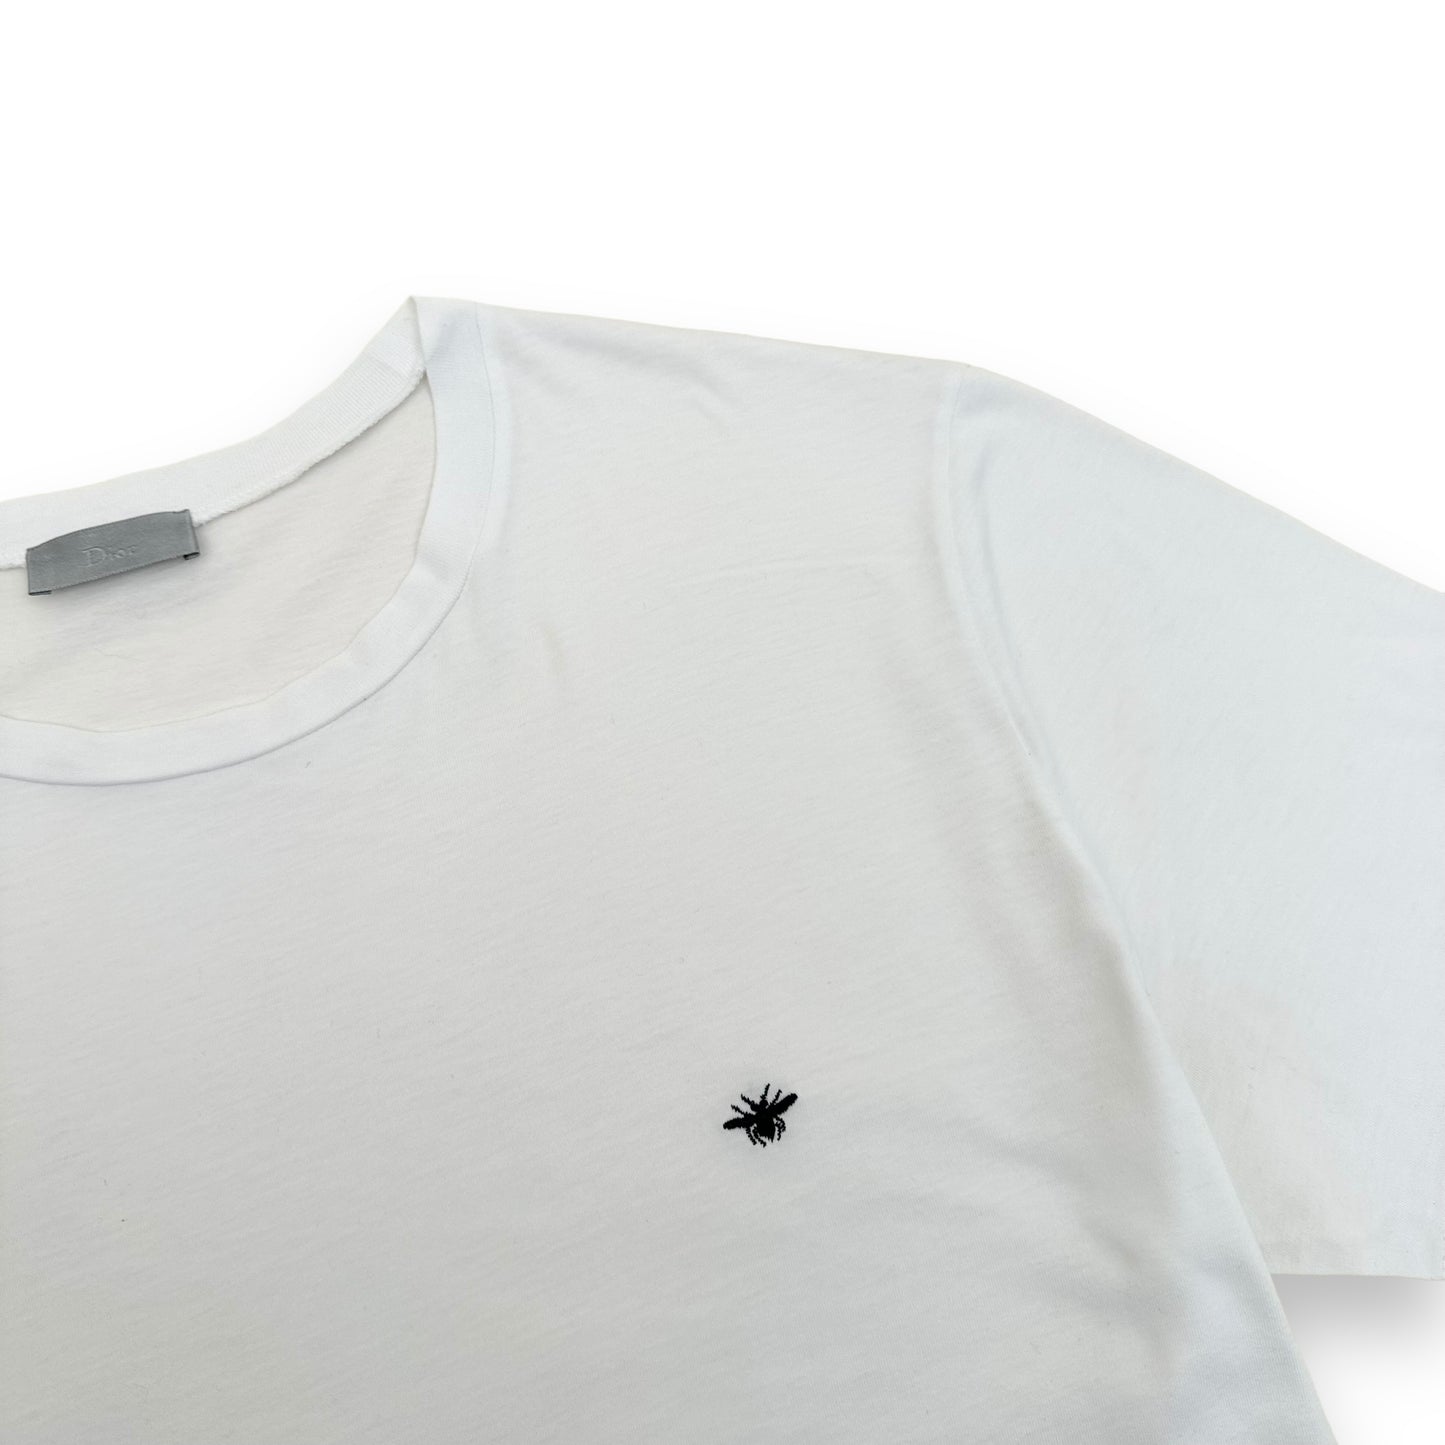 DIOR EMBOSSED BEE LOGO COTTON T-SHIRT WHITE XL